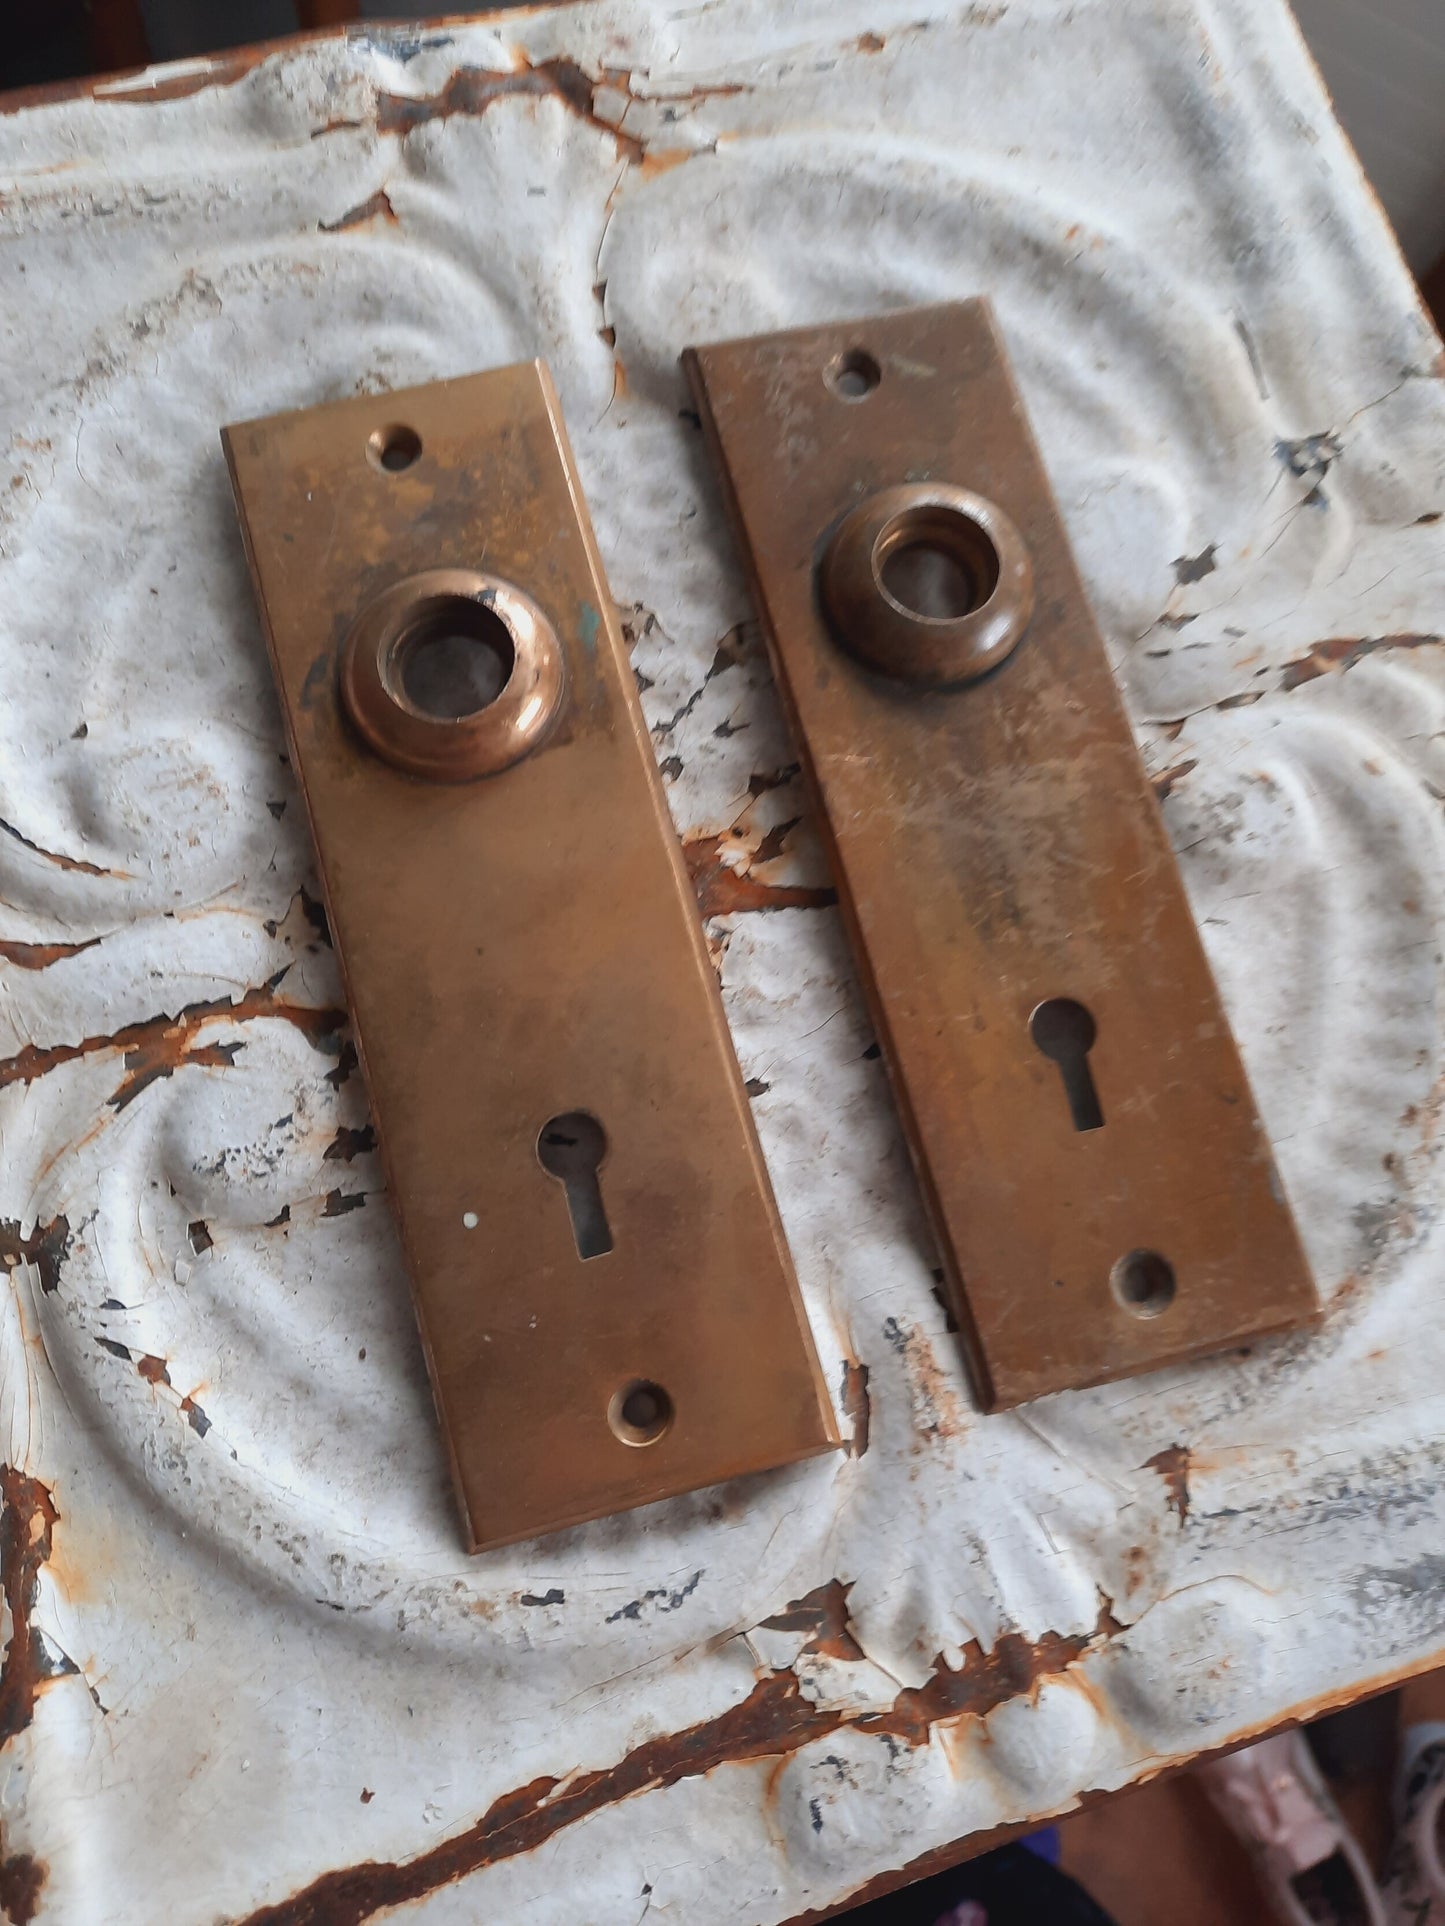 Pair of Solid Bronze Antique Door Knob Backplates, Free Shipping